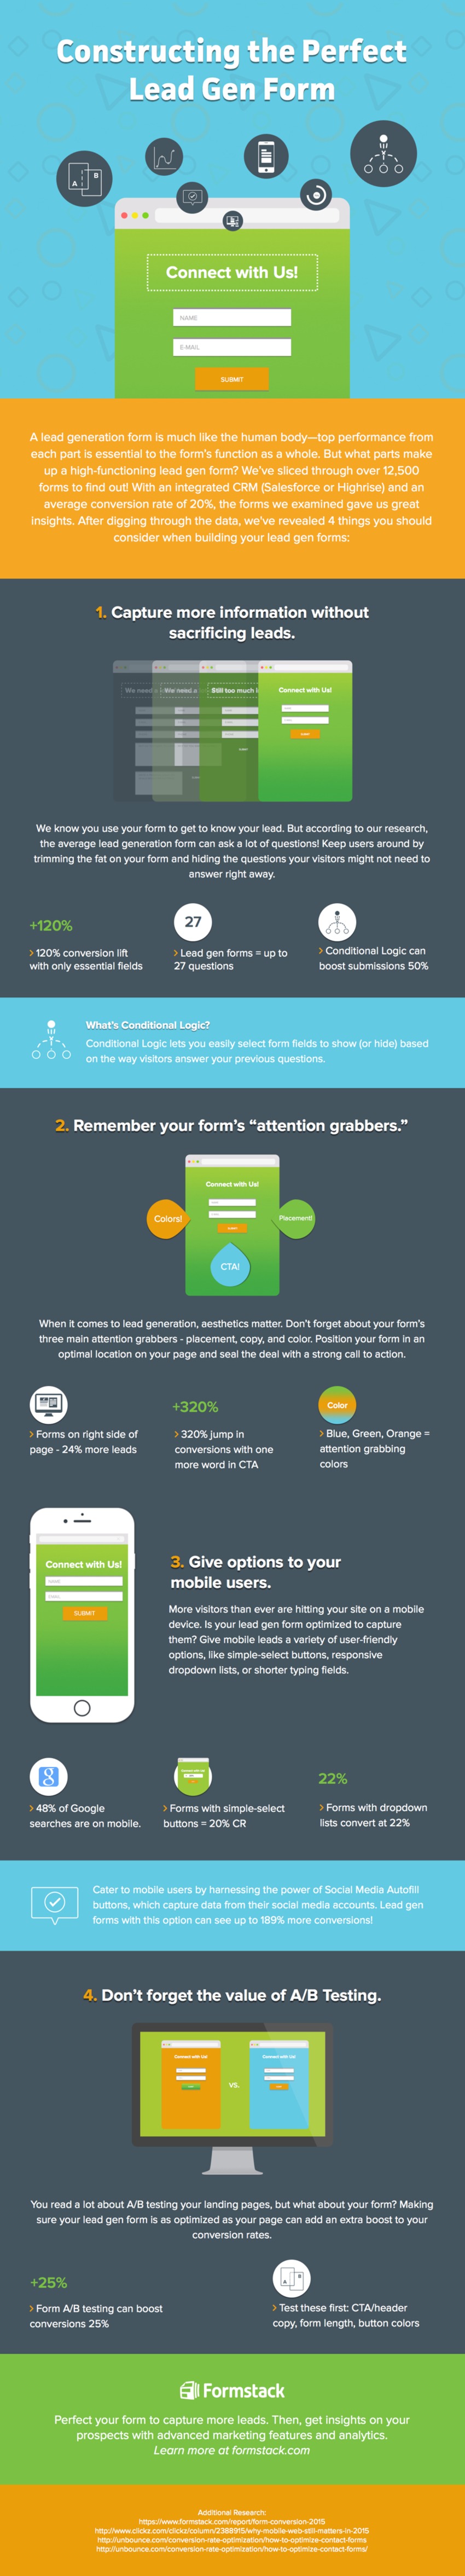 How to Create the Perfect Lead Generation Form [Infographic] - Webbiquity | The MarTech Digest | Scoop.it